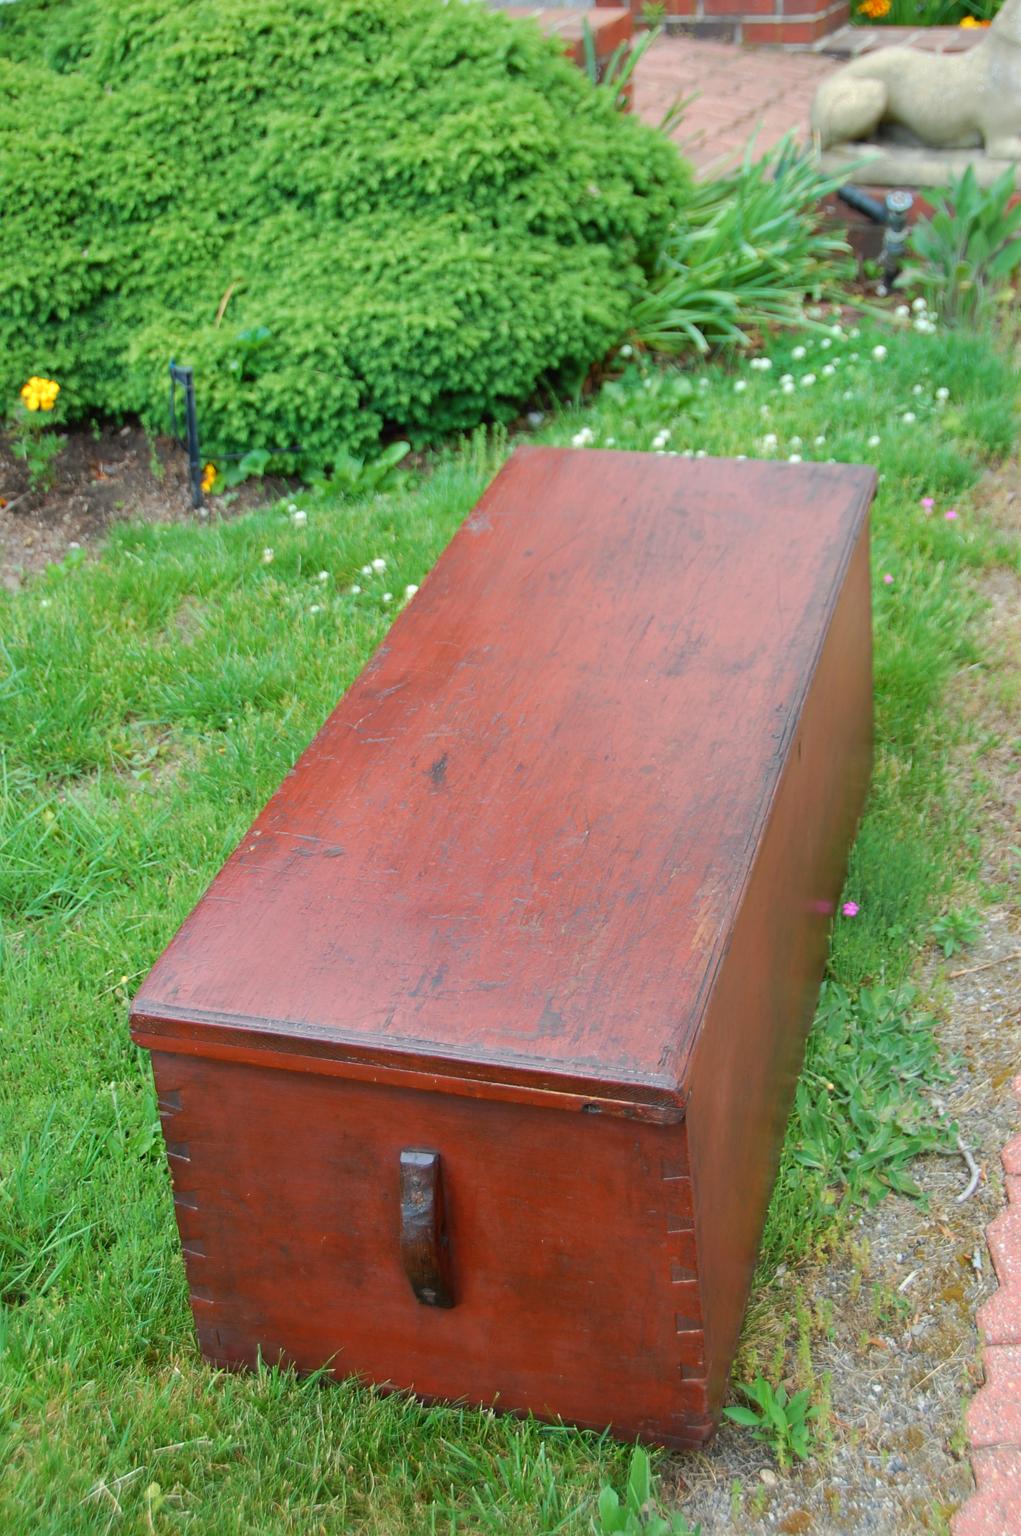 American mid 19th century six board seaman's chest with interior till, molded top, dovetailed construction and original red finish. The becket holders have been repaired and the rope beckets have not survived. This classic American piece of naval